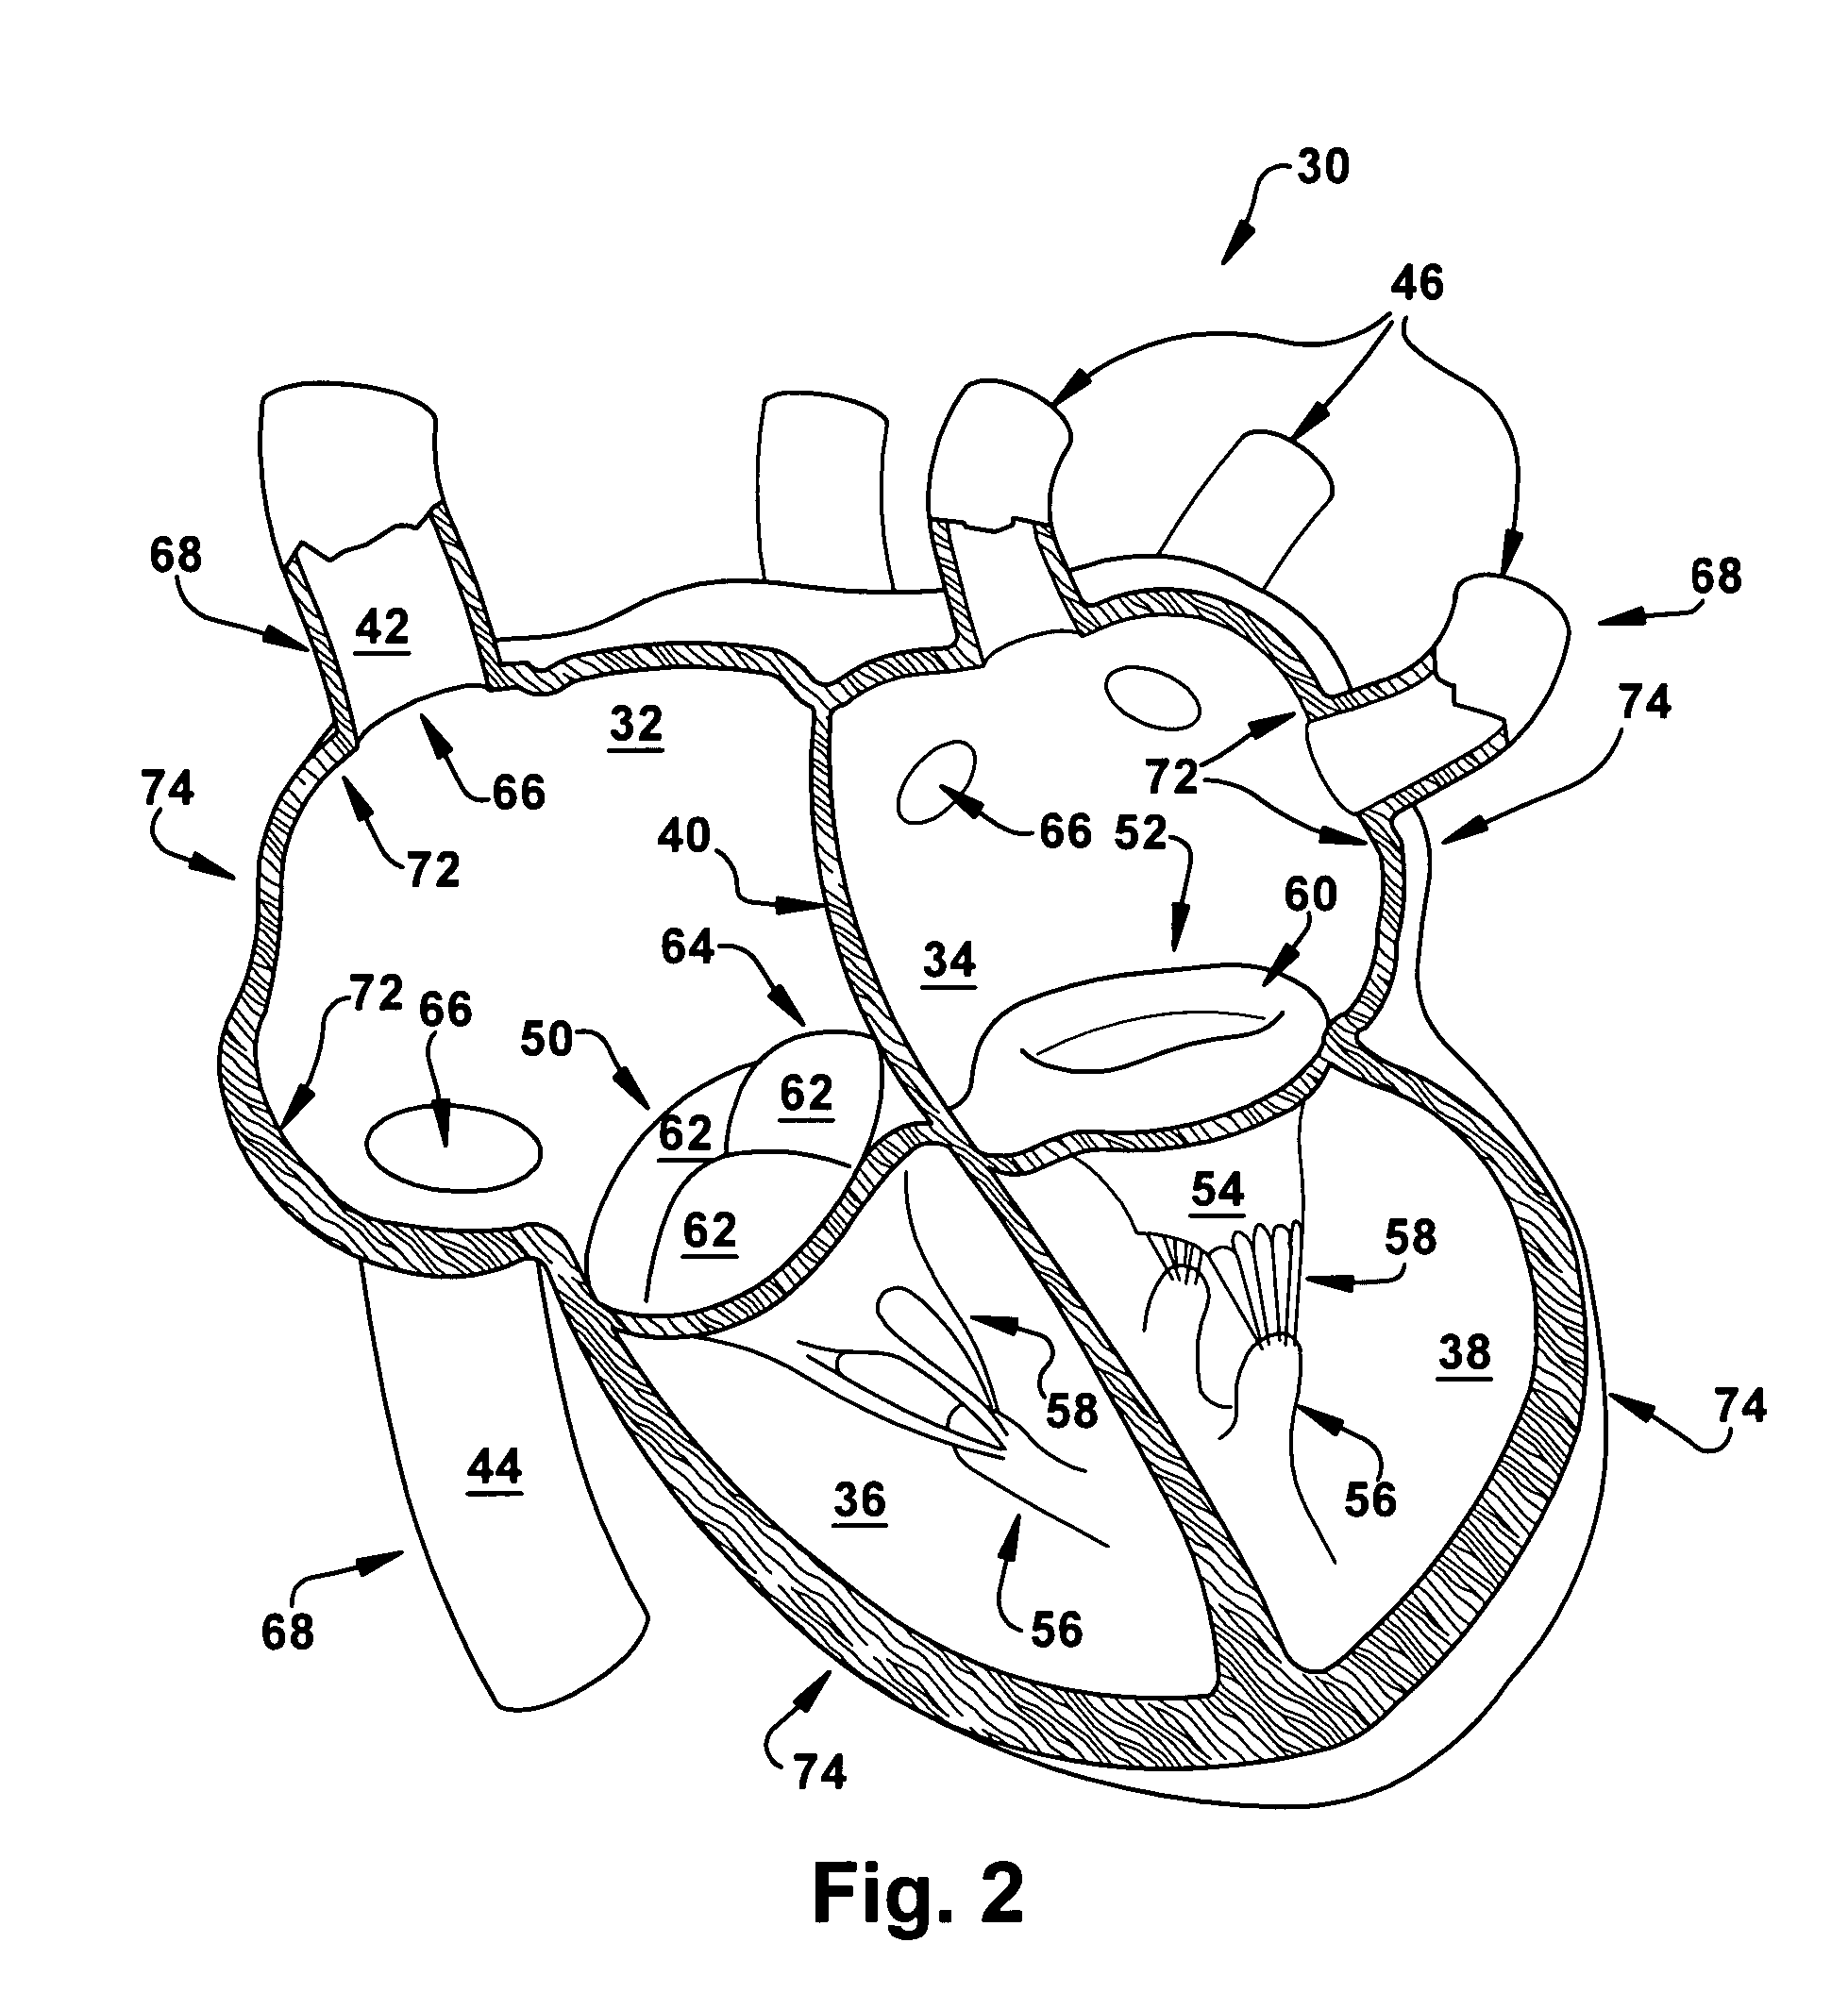 Apparatus and method for treating cardiovascular diseases